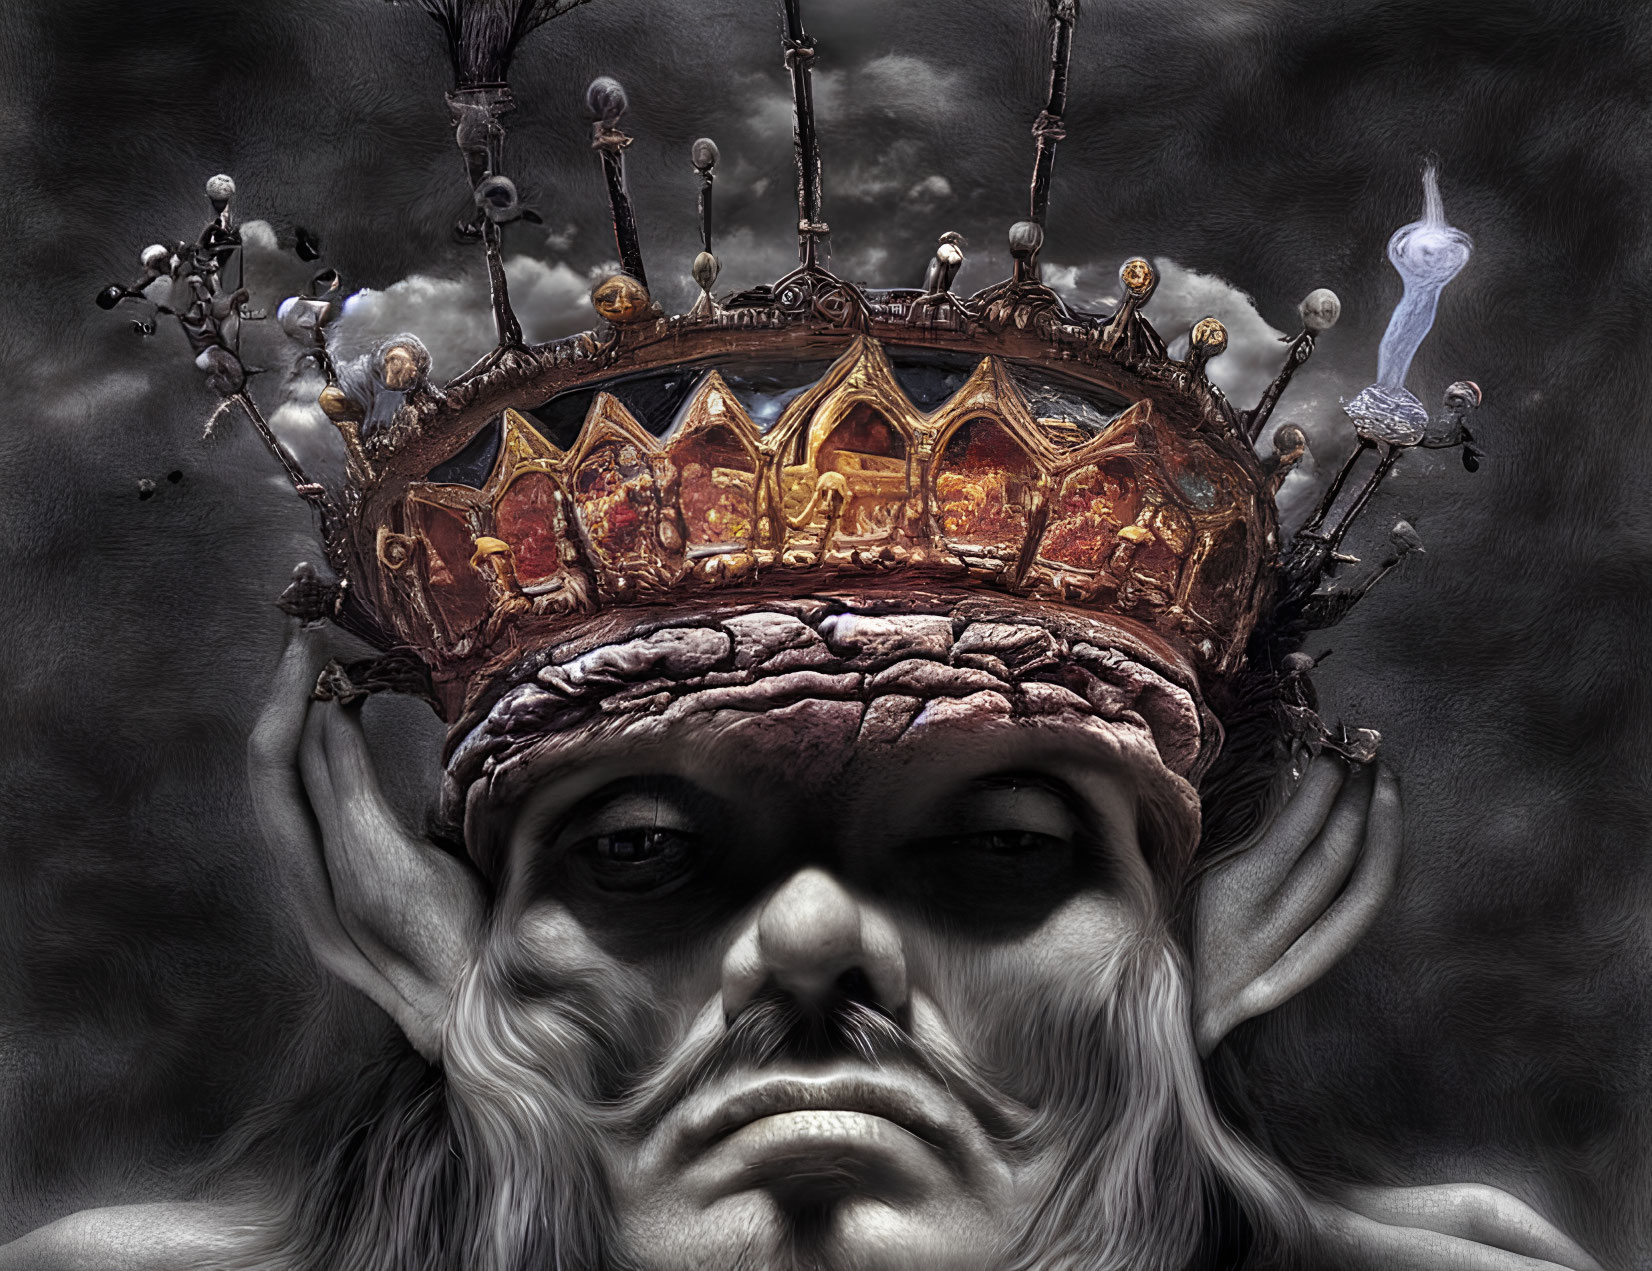 Surreal portrait featuring ornate crown with skulls and glowing elements above intense eyes.